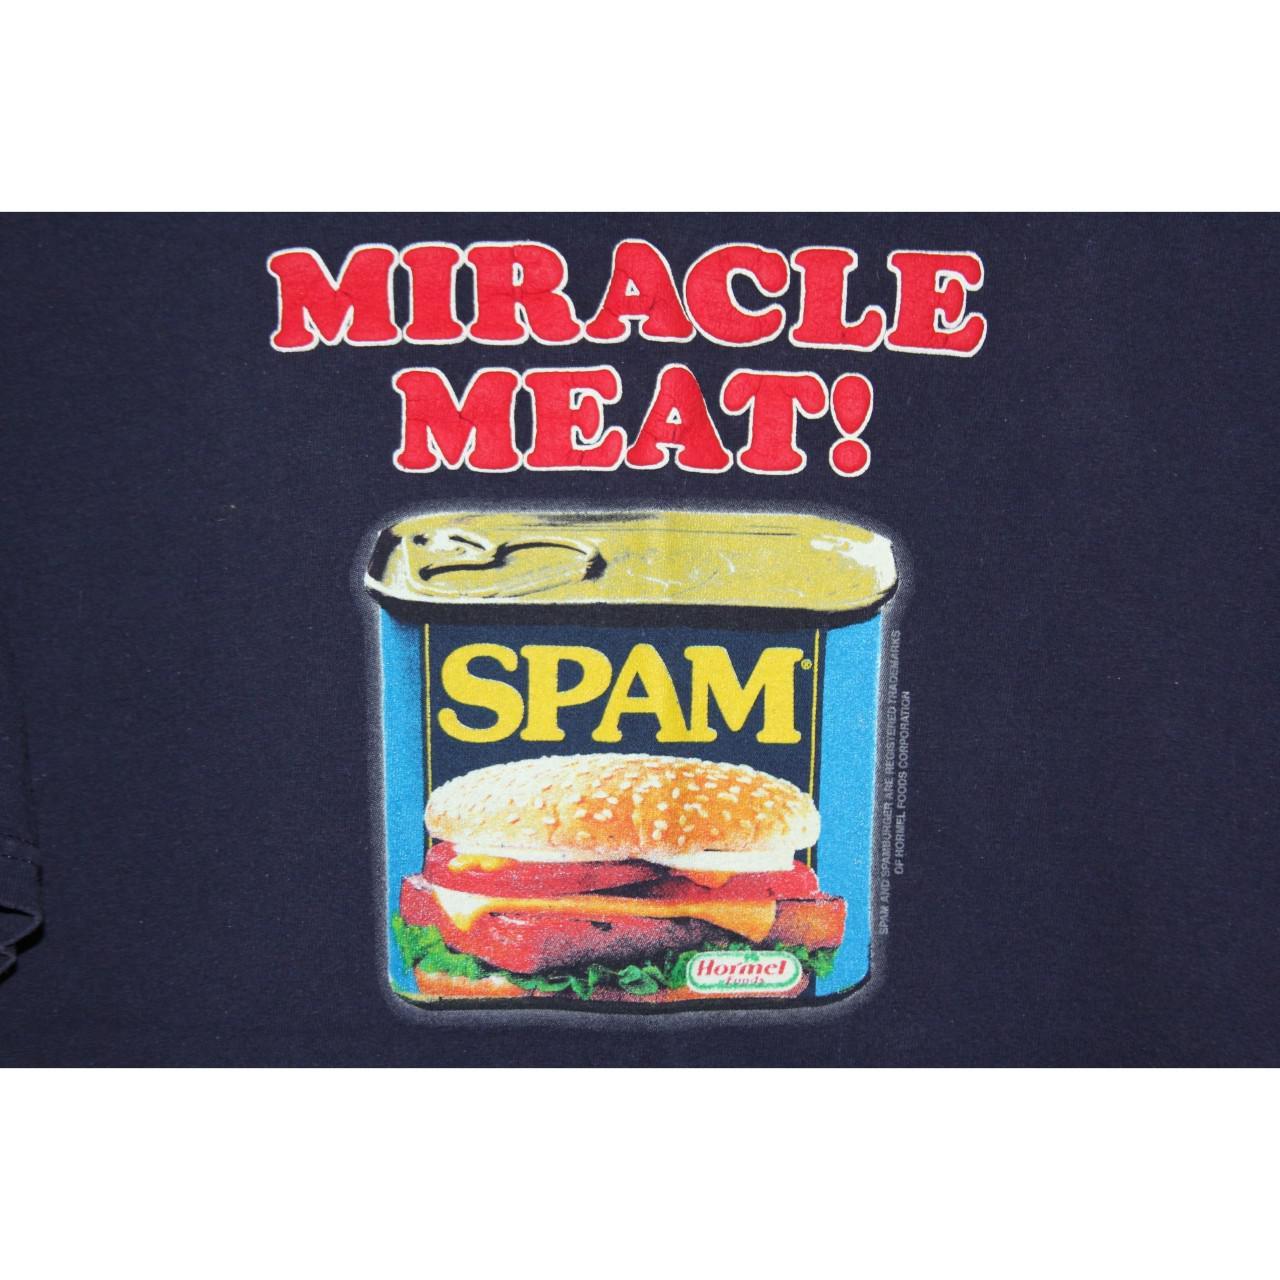 Product Image 2 - Vintage Spam Tee
Sz. Large
Condition -